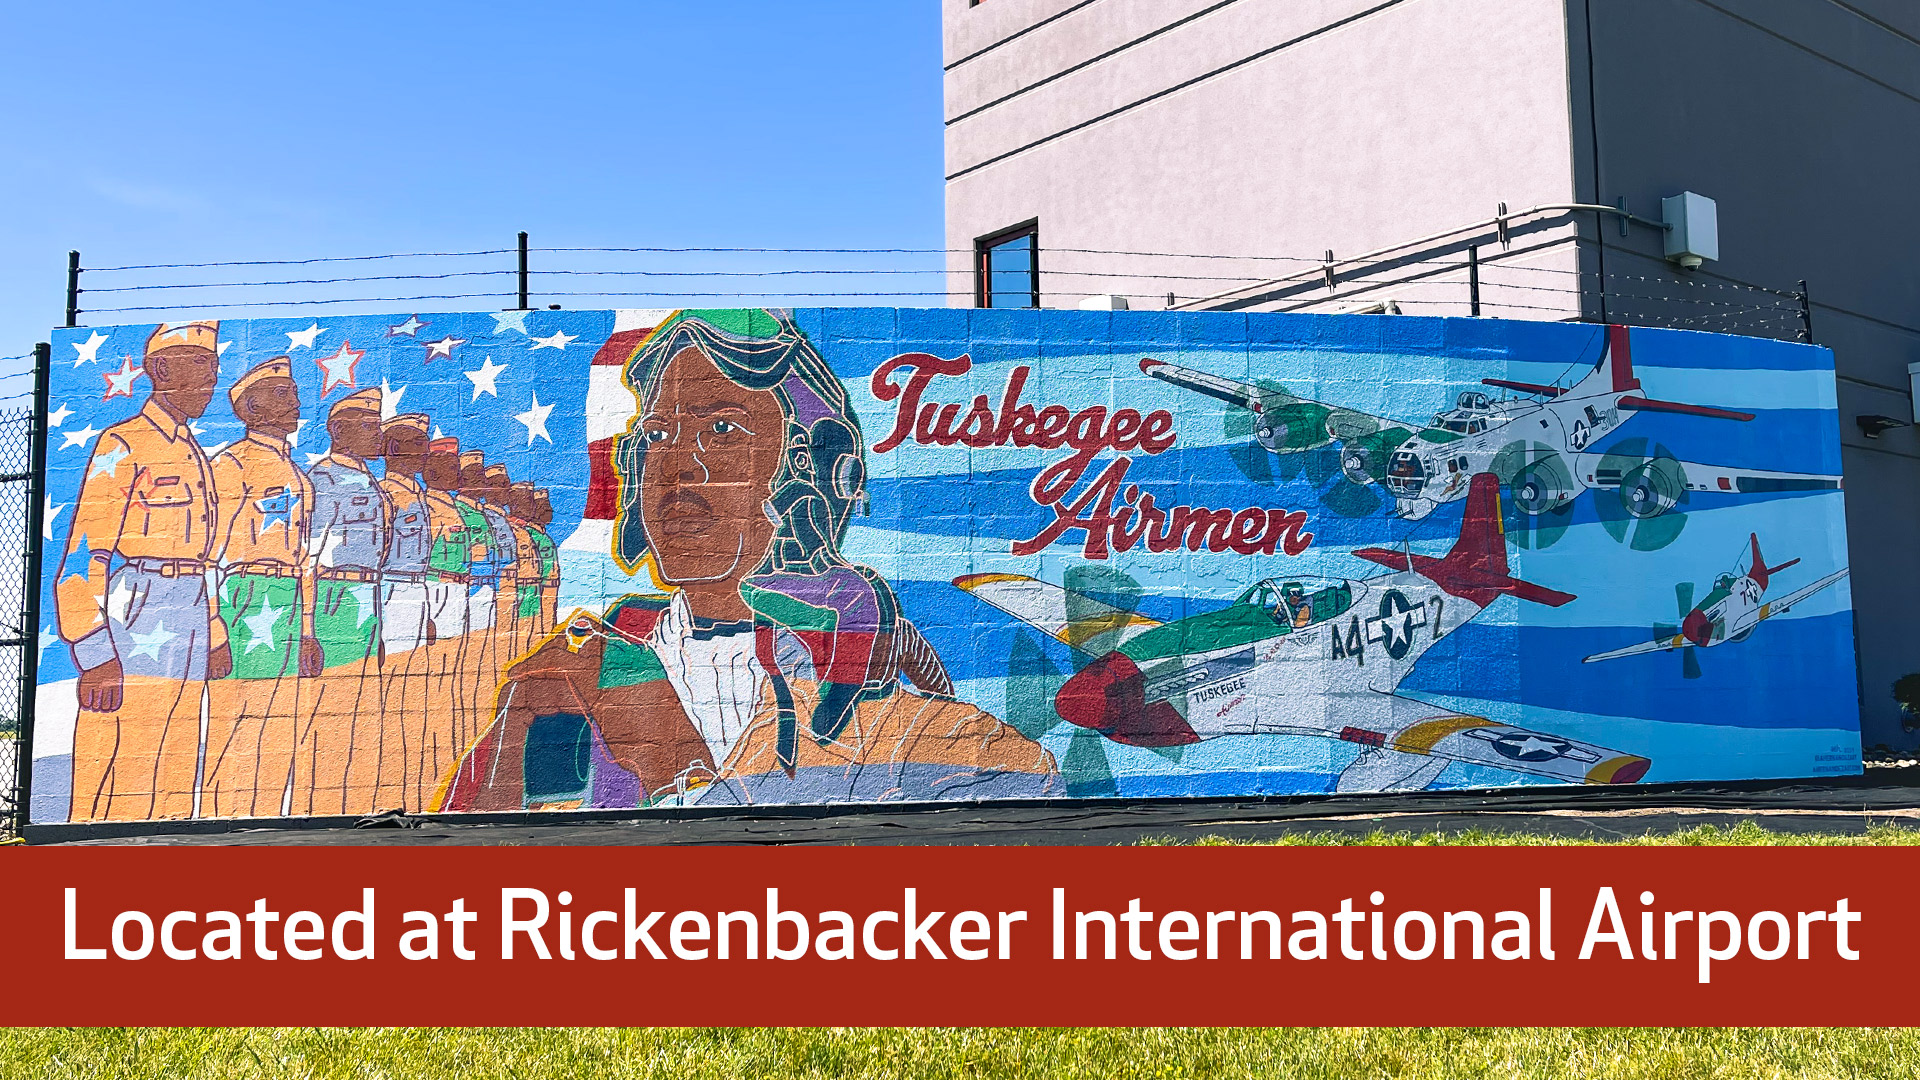 A vibrant mural depicting the Tuskegee Airmen with various military aircraft and personnel, located at Rickenbacker International Airport.